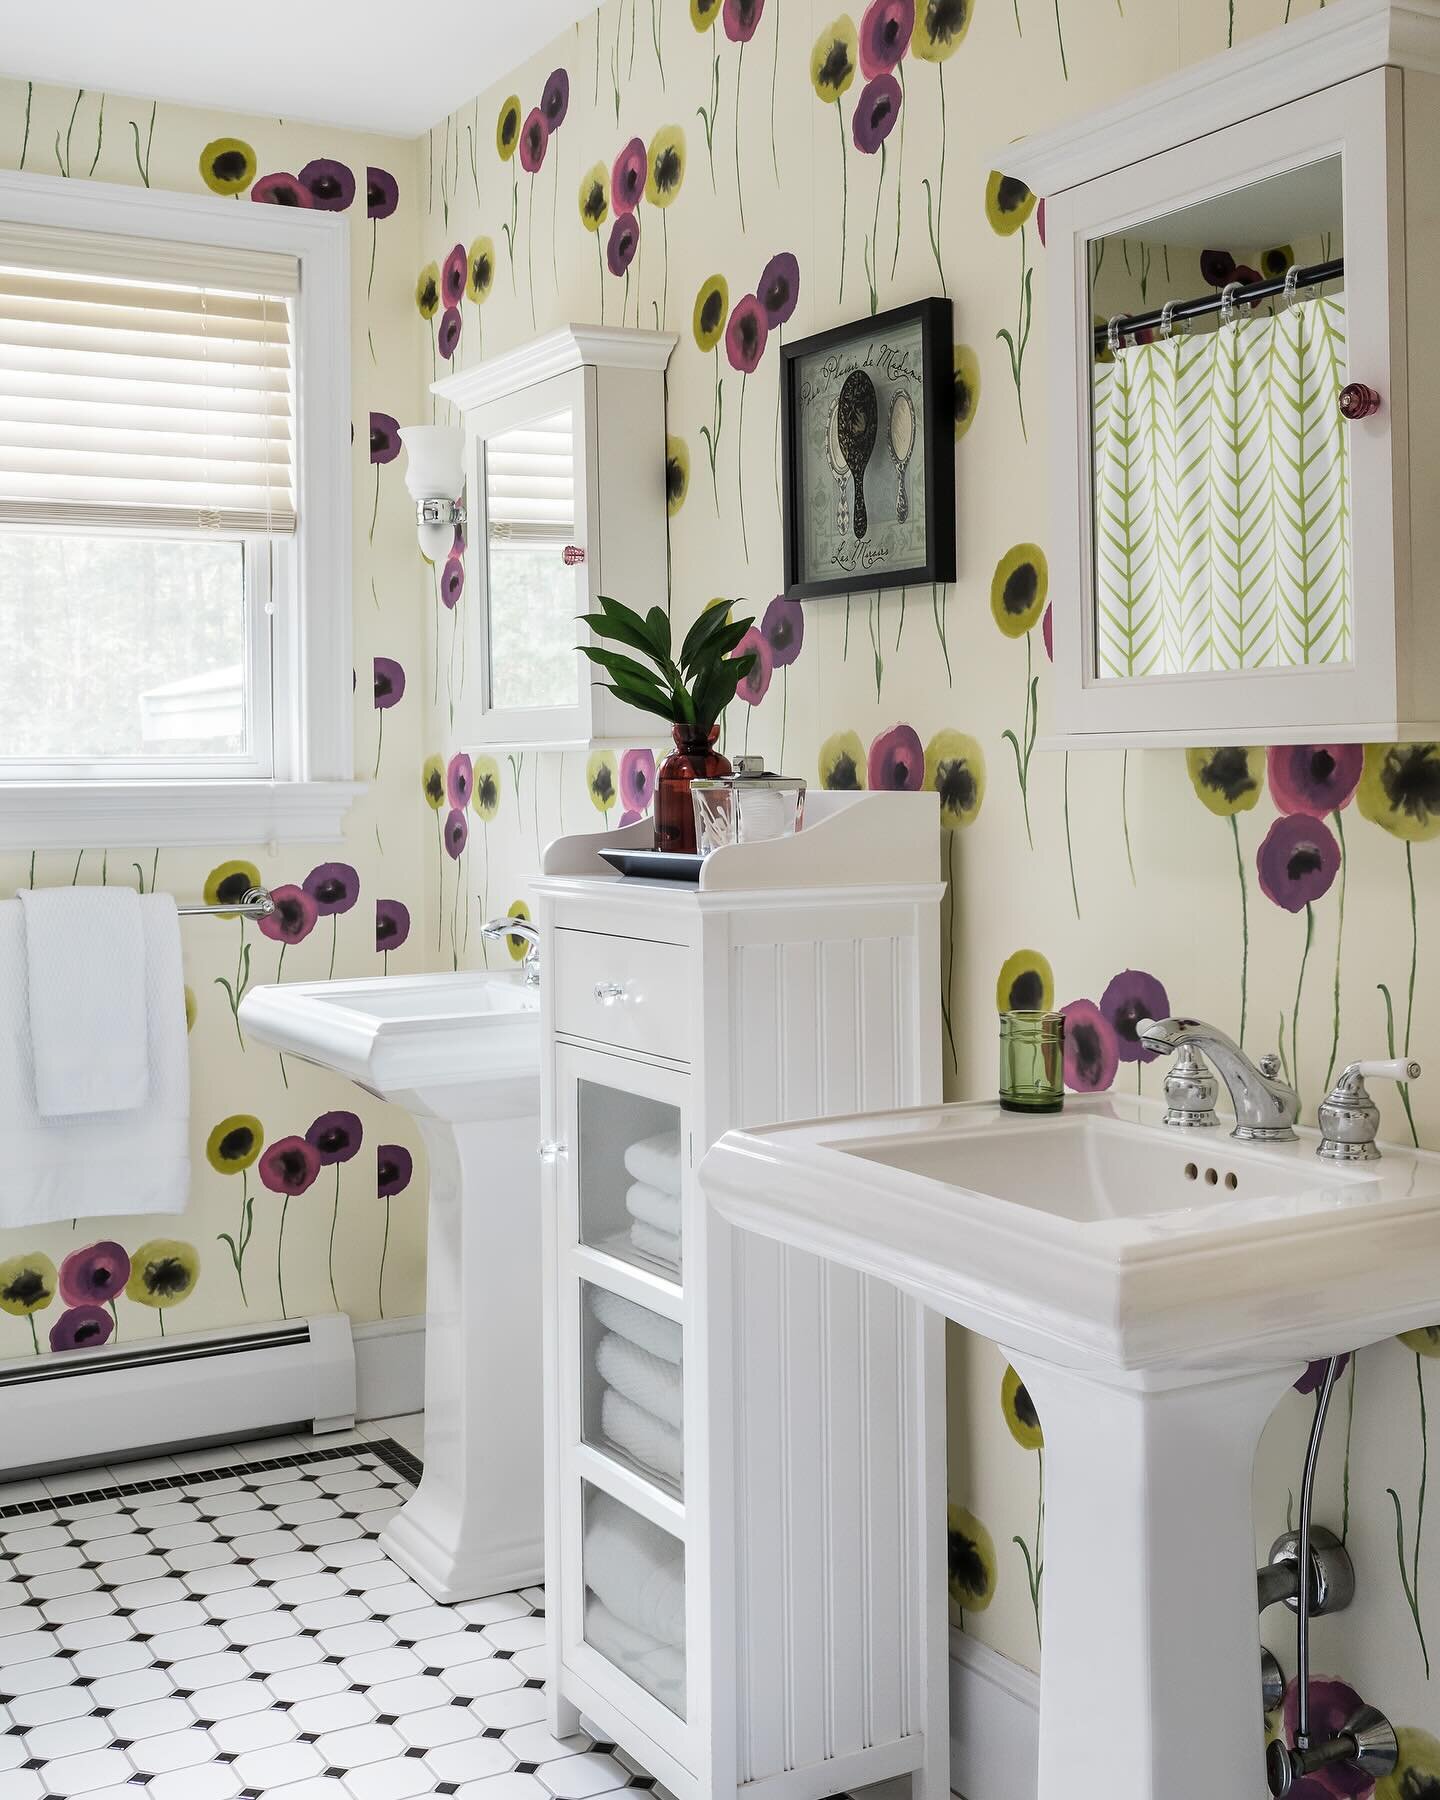 I love to mix patterns in our design work&hellip; when done thoughtfully, mixing brings a space to life! No matter the space, I always start with how my clients want it to feel and leave room to be inspired from there. 

We designed this bathroom to 